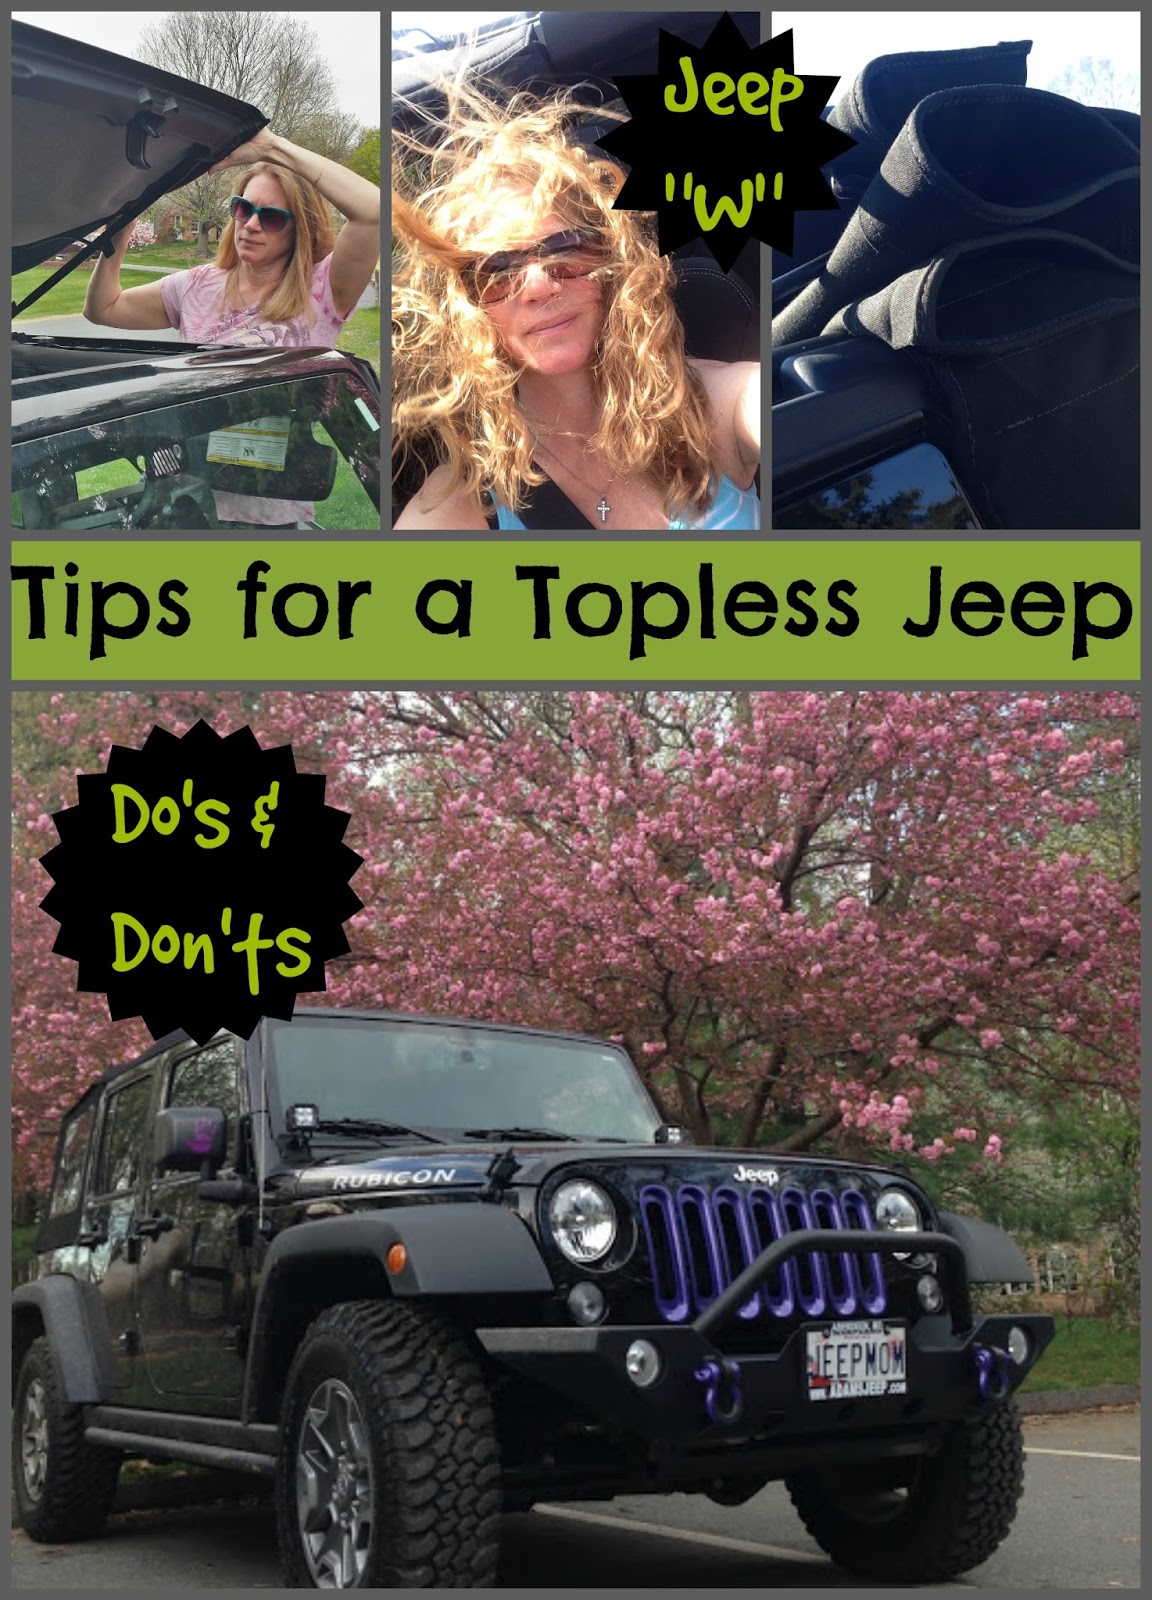 Nude Jeep. Driving Nude Makes Me Horny - Nude Exhibitionist - Free Porn Videos - YouPorn